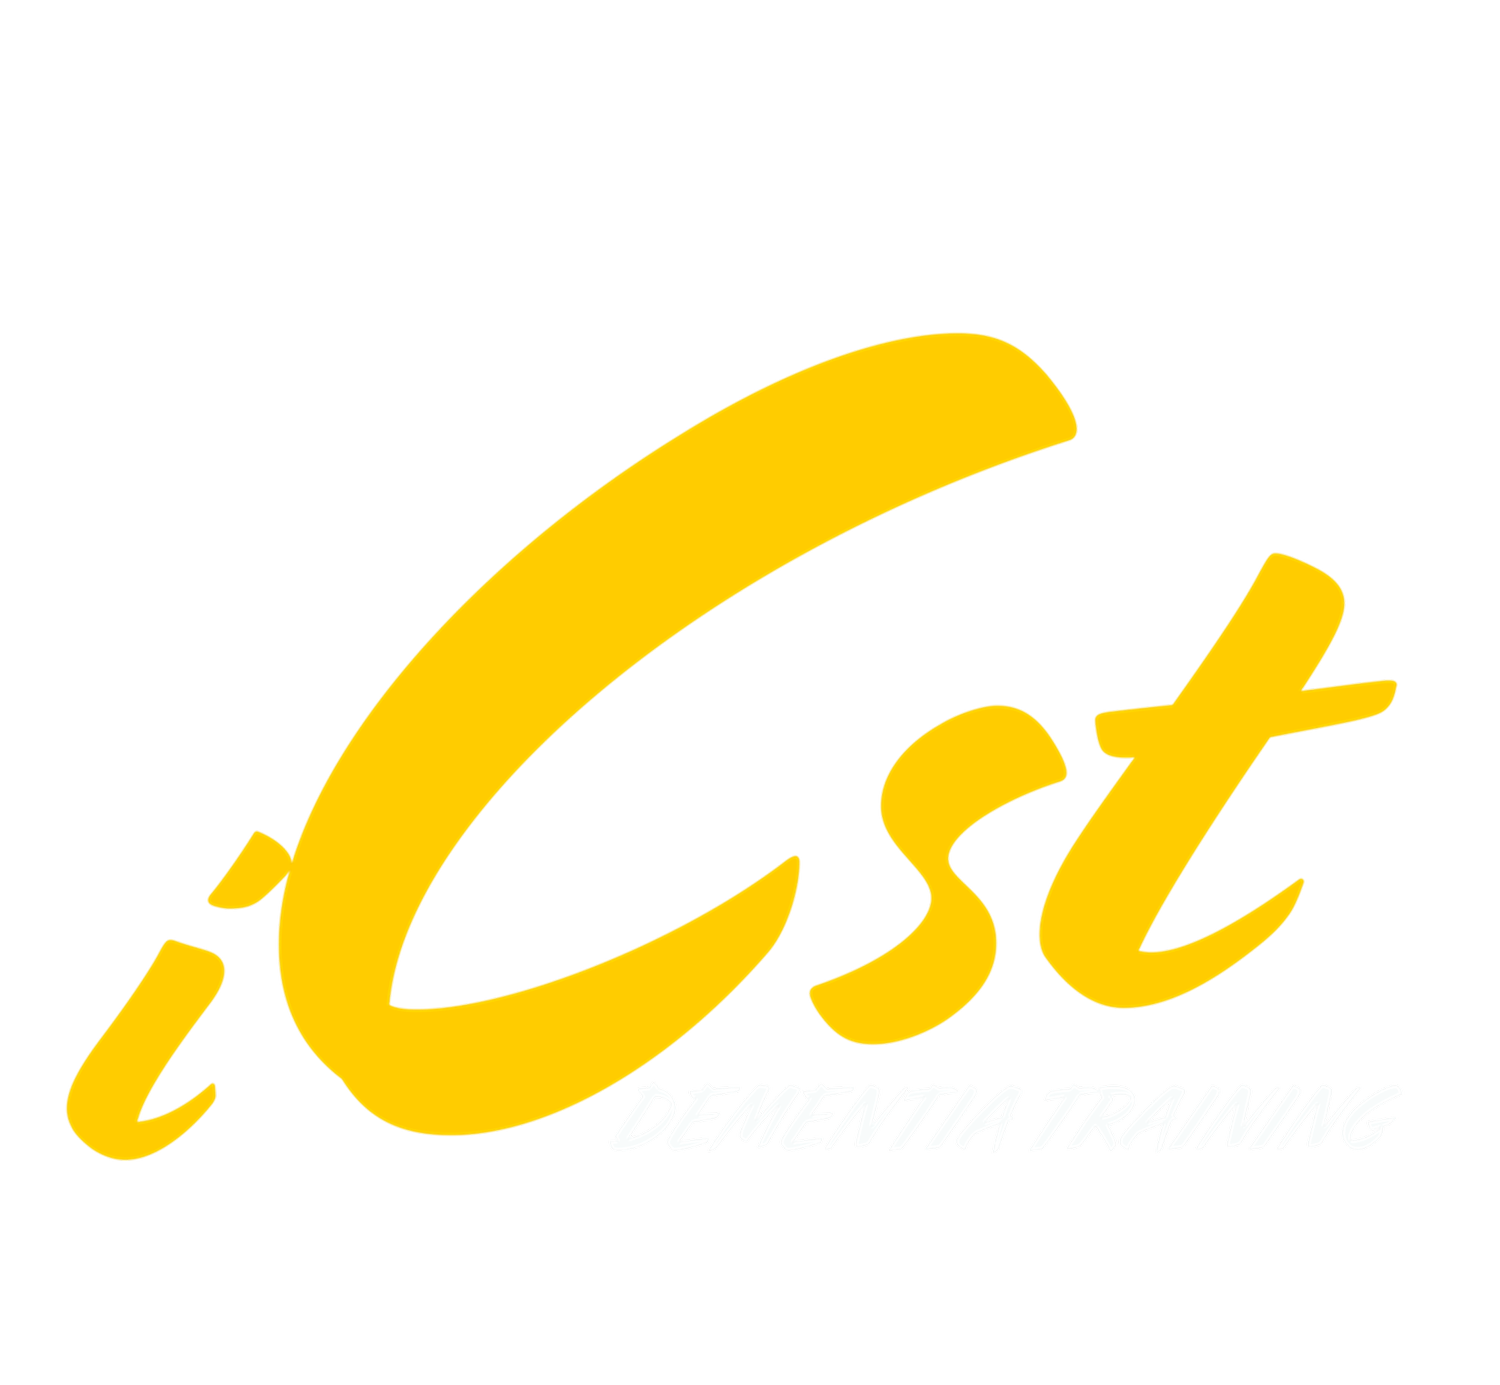 iCST Dementia Training and Consultancy/Coaching